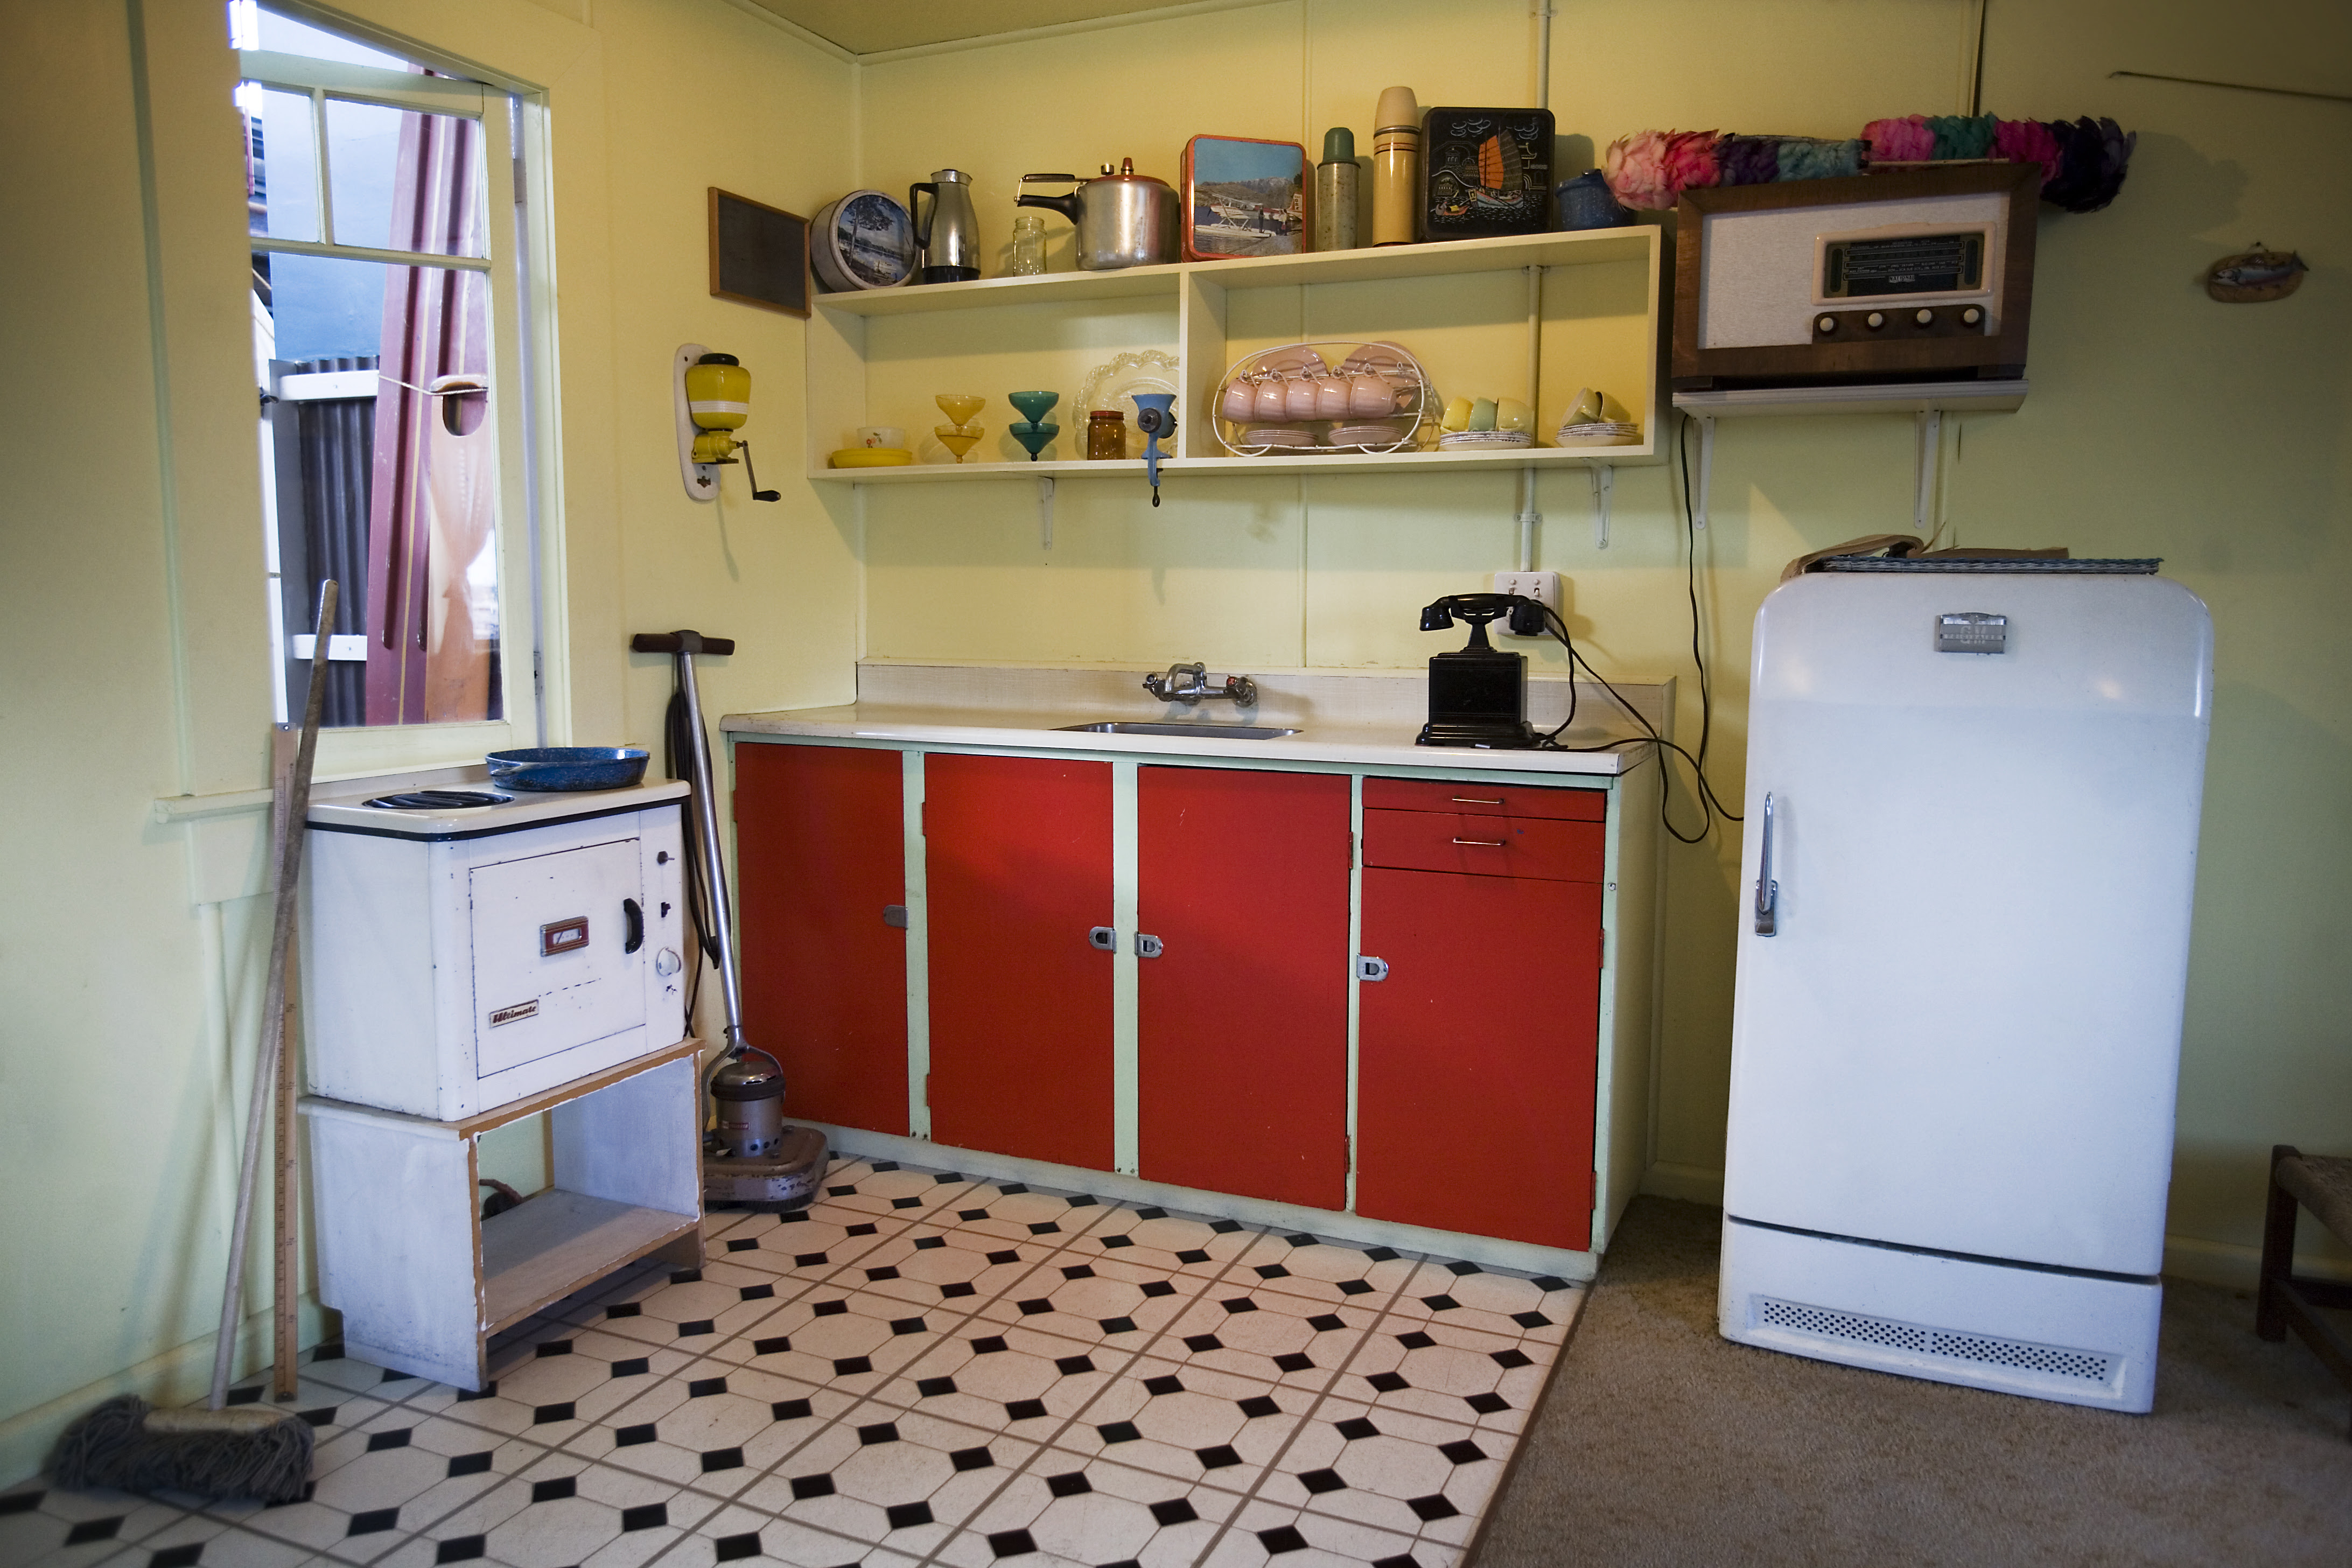 The Fifties Kitchen